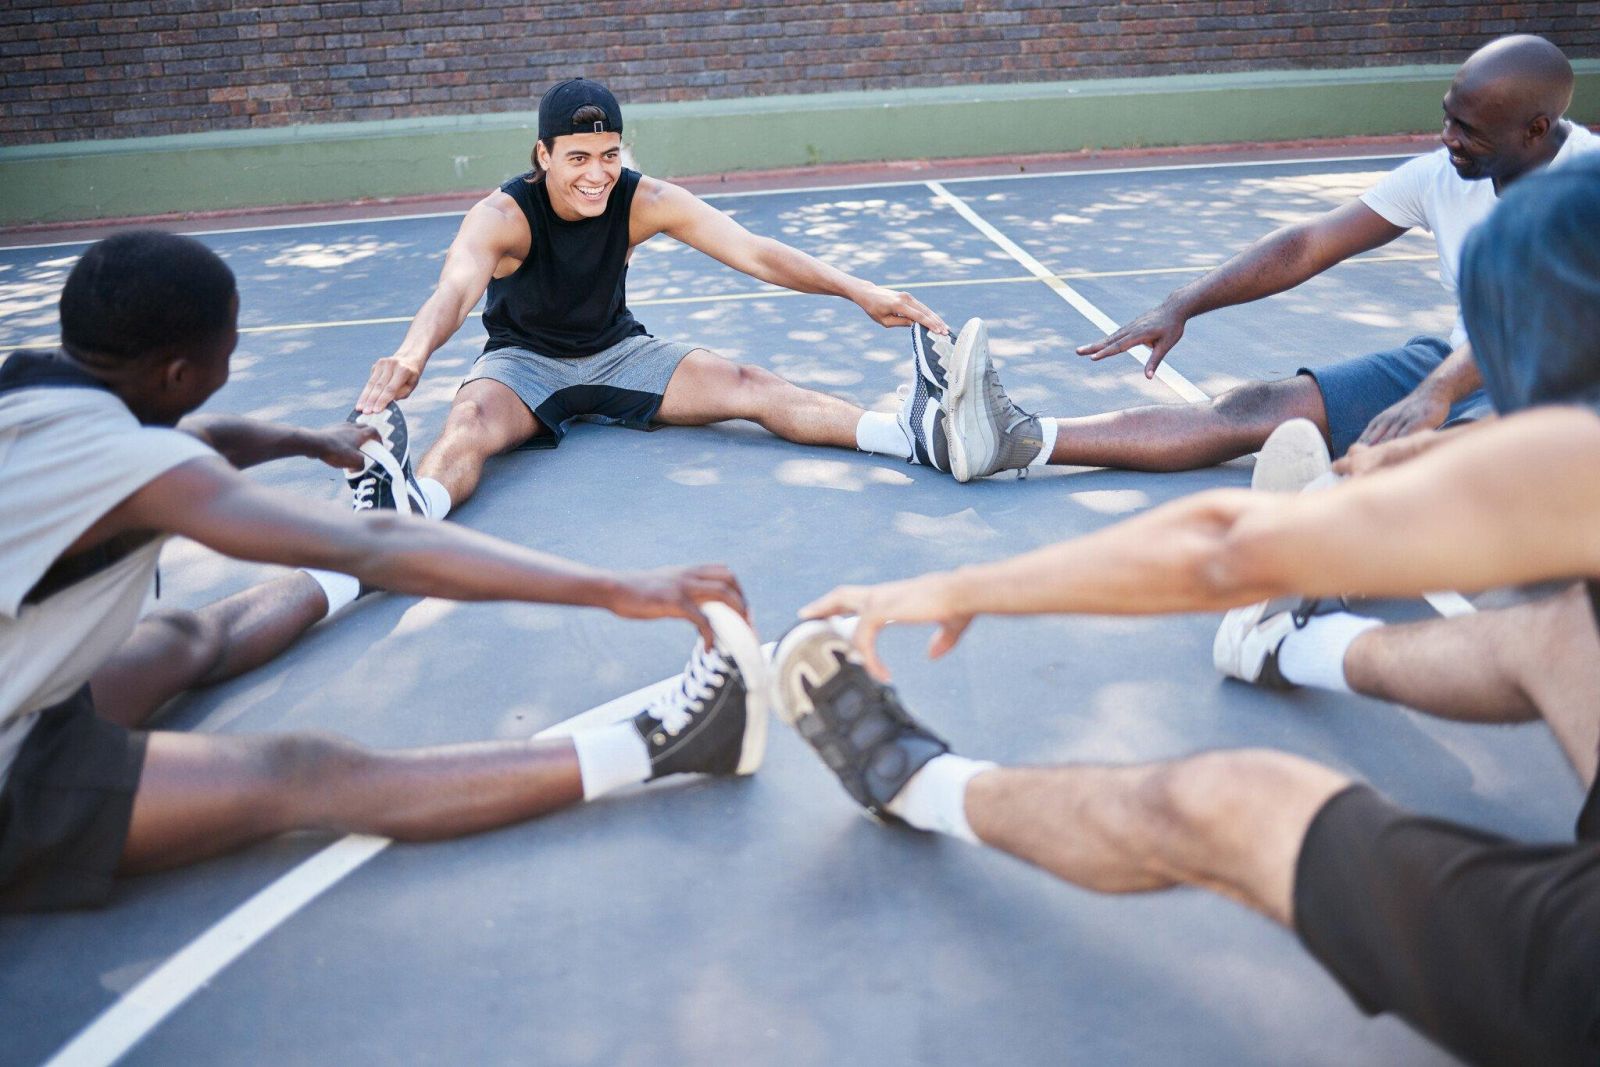 Resize fitness men stretching on outdoor sport court wit 2023 11 27 05 14 40 utc